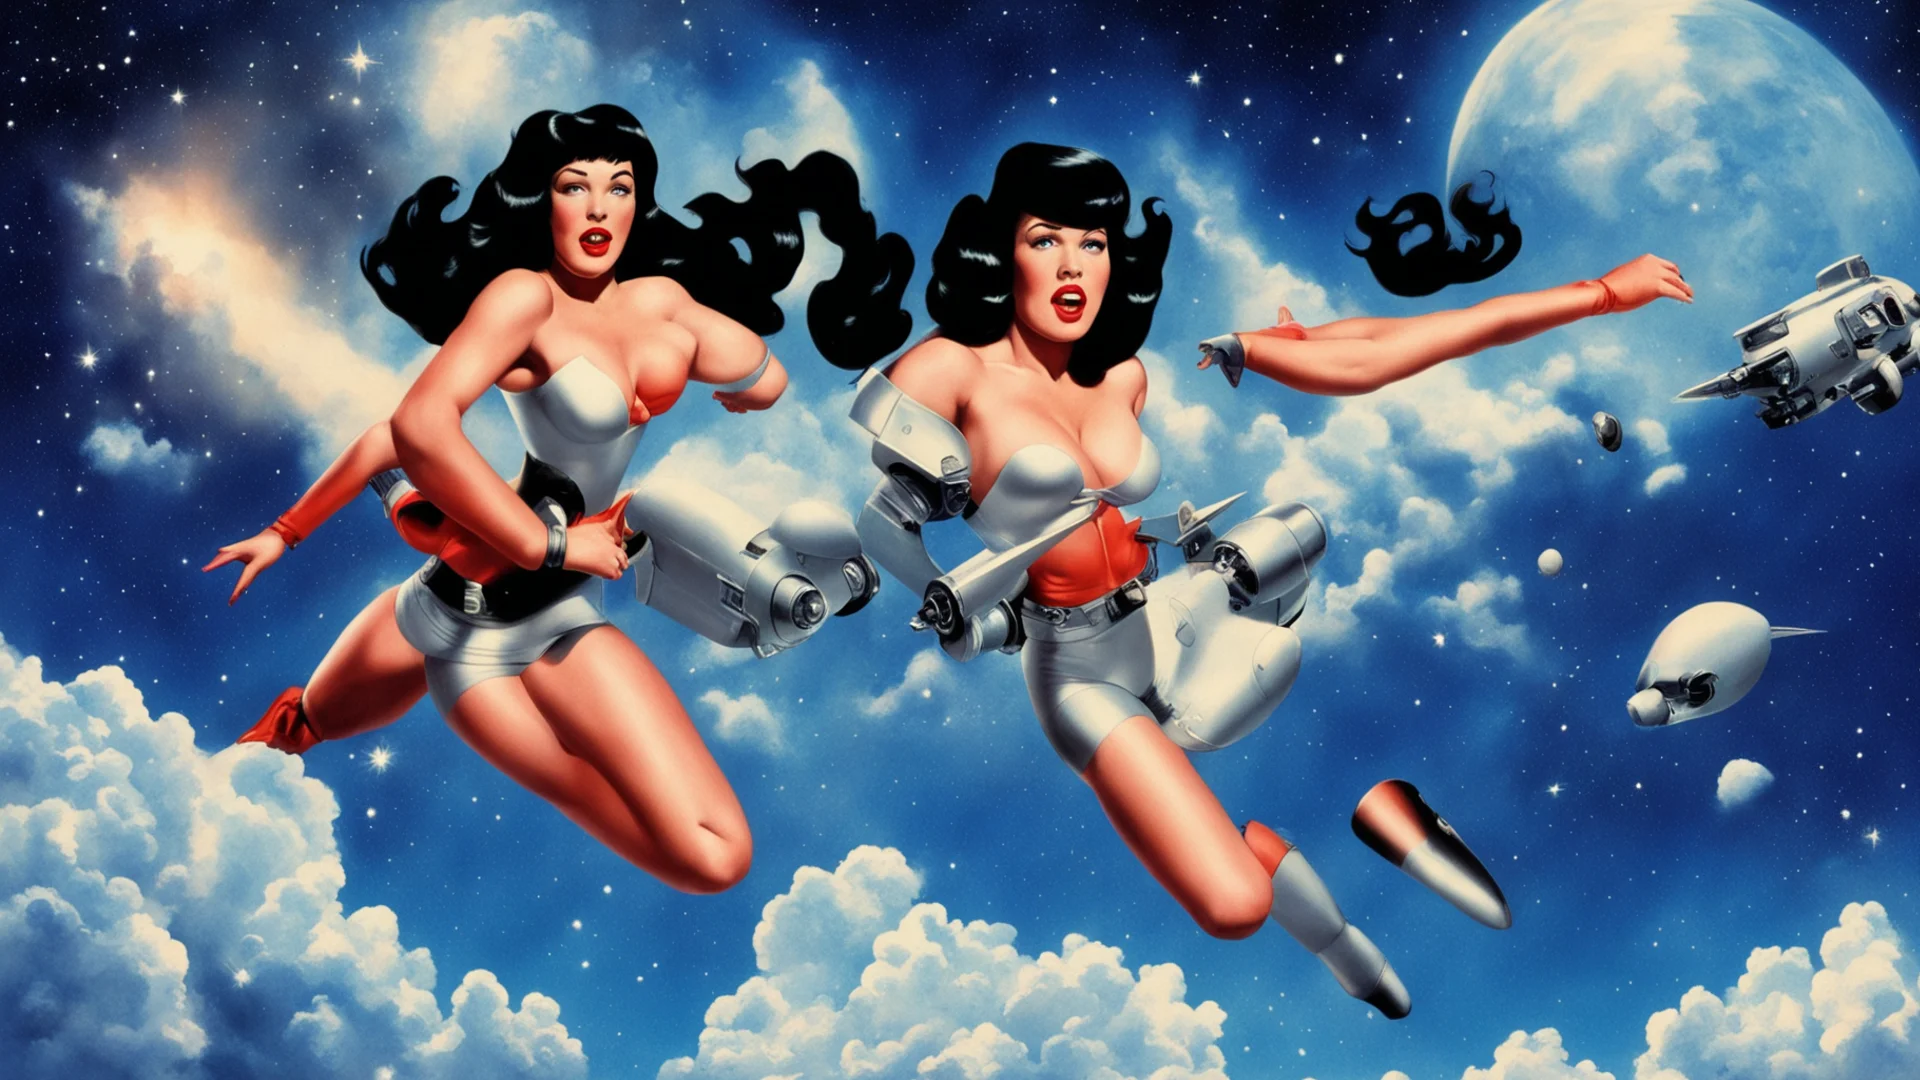 bettie page as a b movie space traveller flying through space with a jet pack confident engaging wow artstation art 3 wide